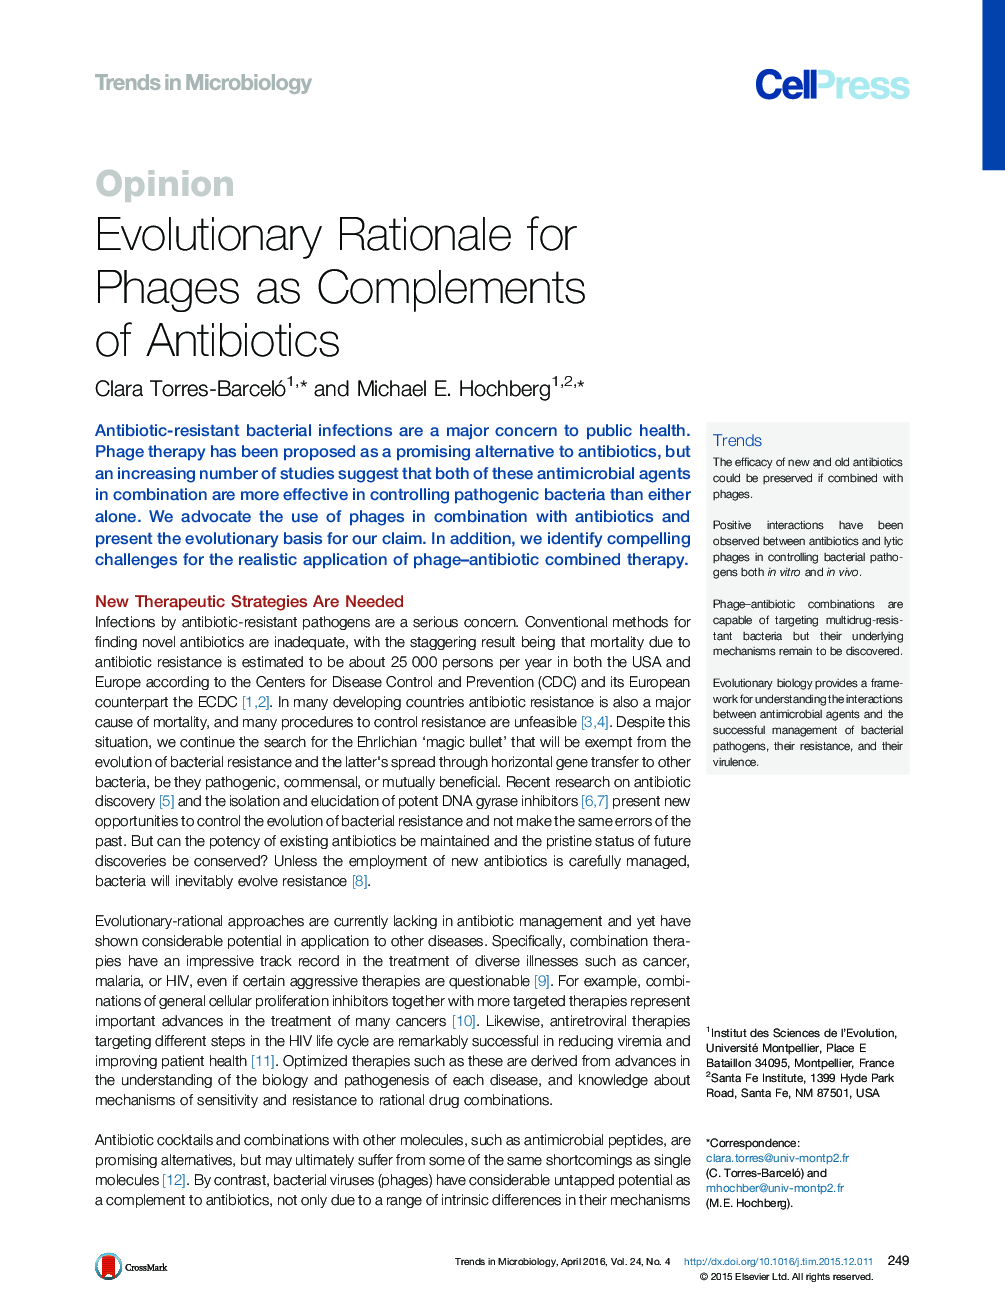 Evolutionary Rationale for Phages as Complements of Antibiotics